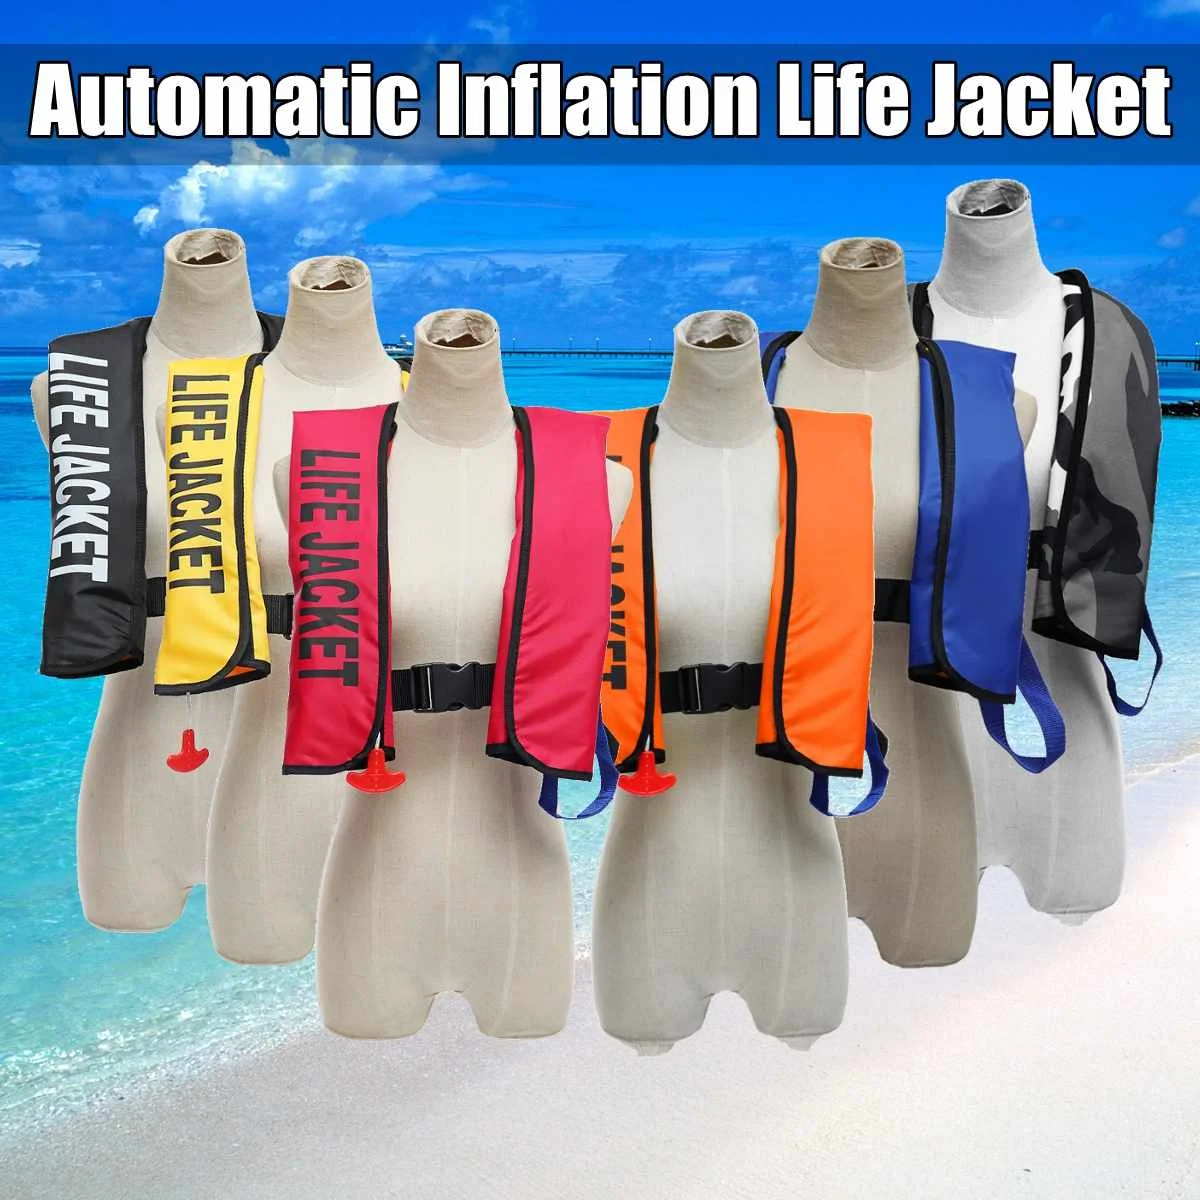 New Adult Inflatable Life Jacket Inflation 150N PFD Manual/ Automatic Blue 